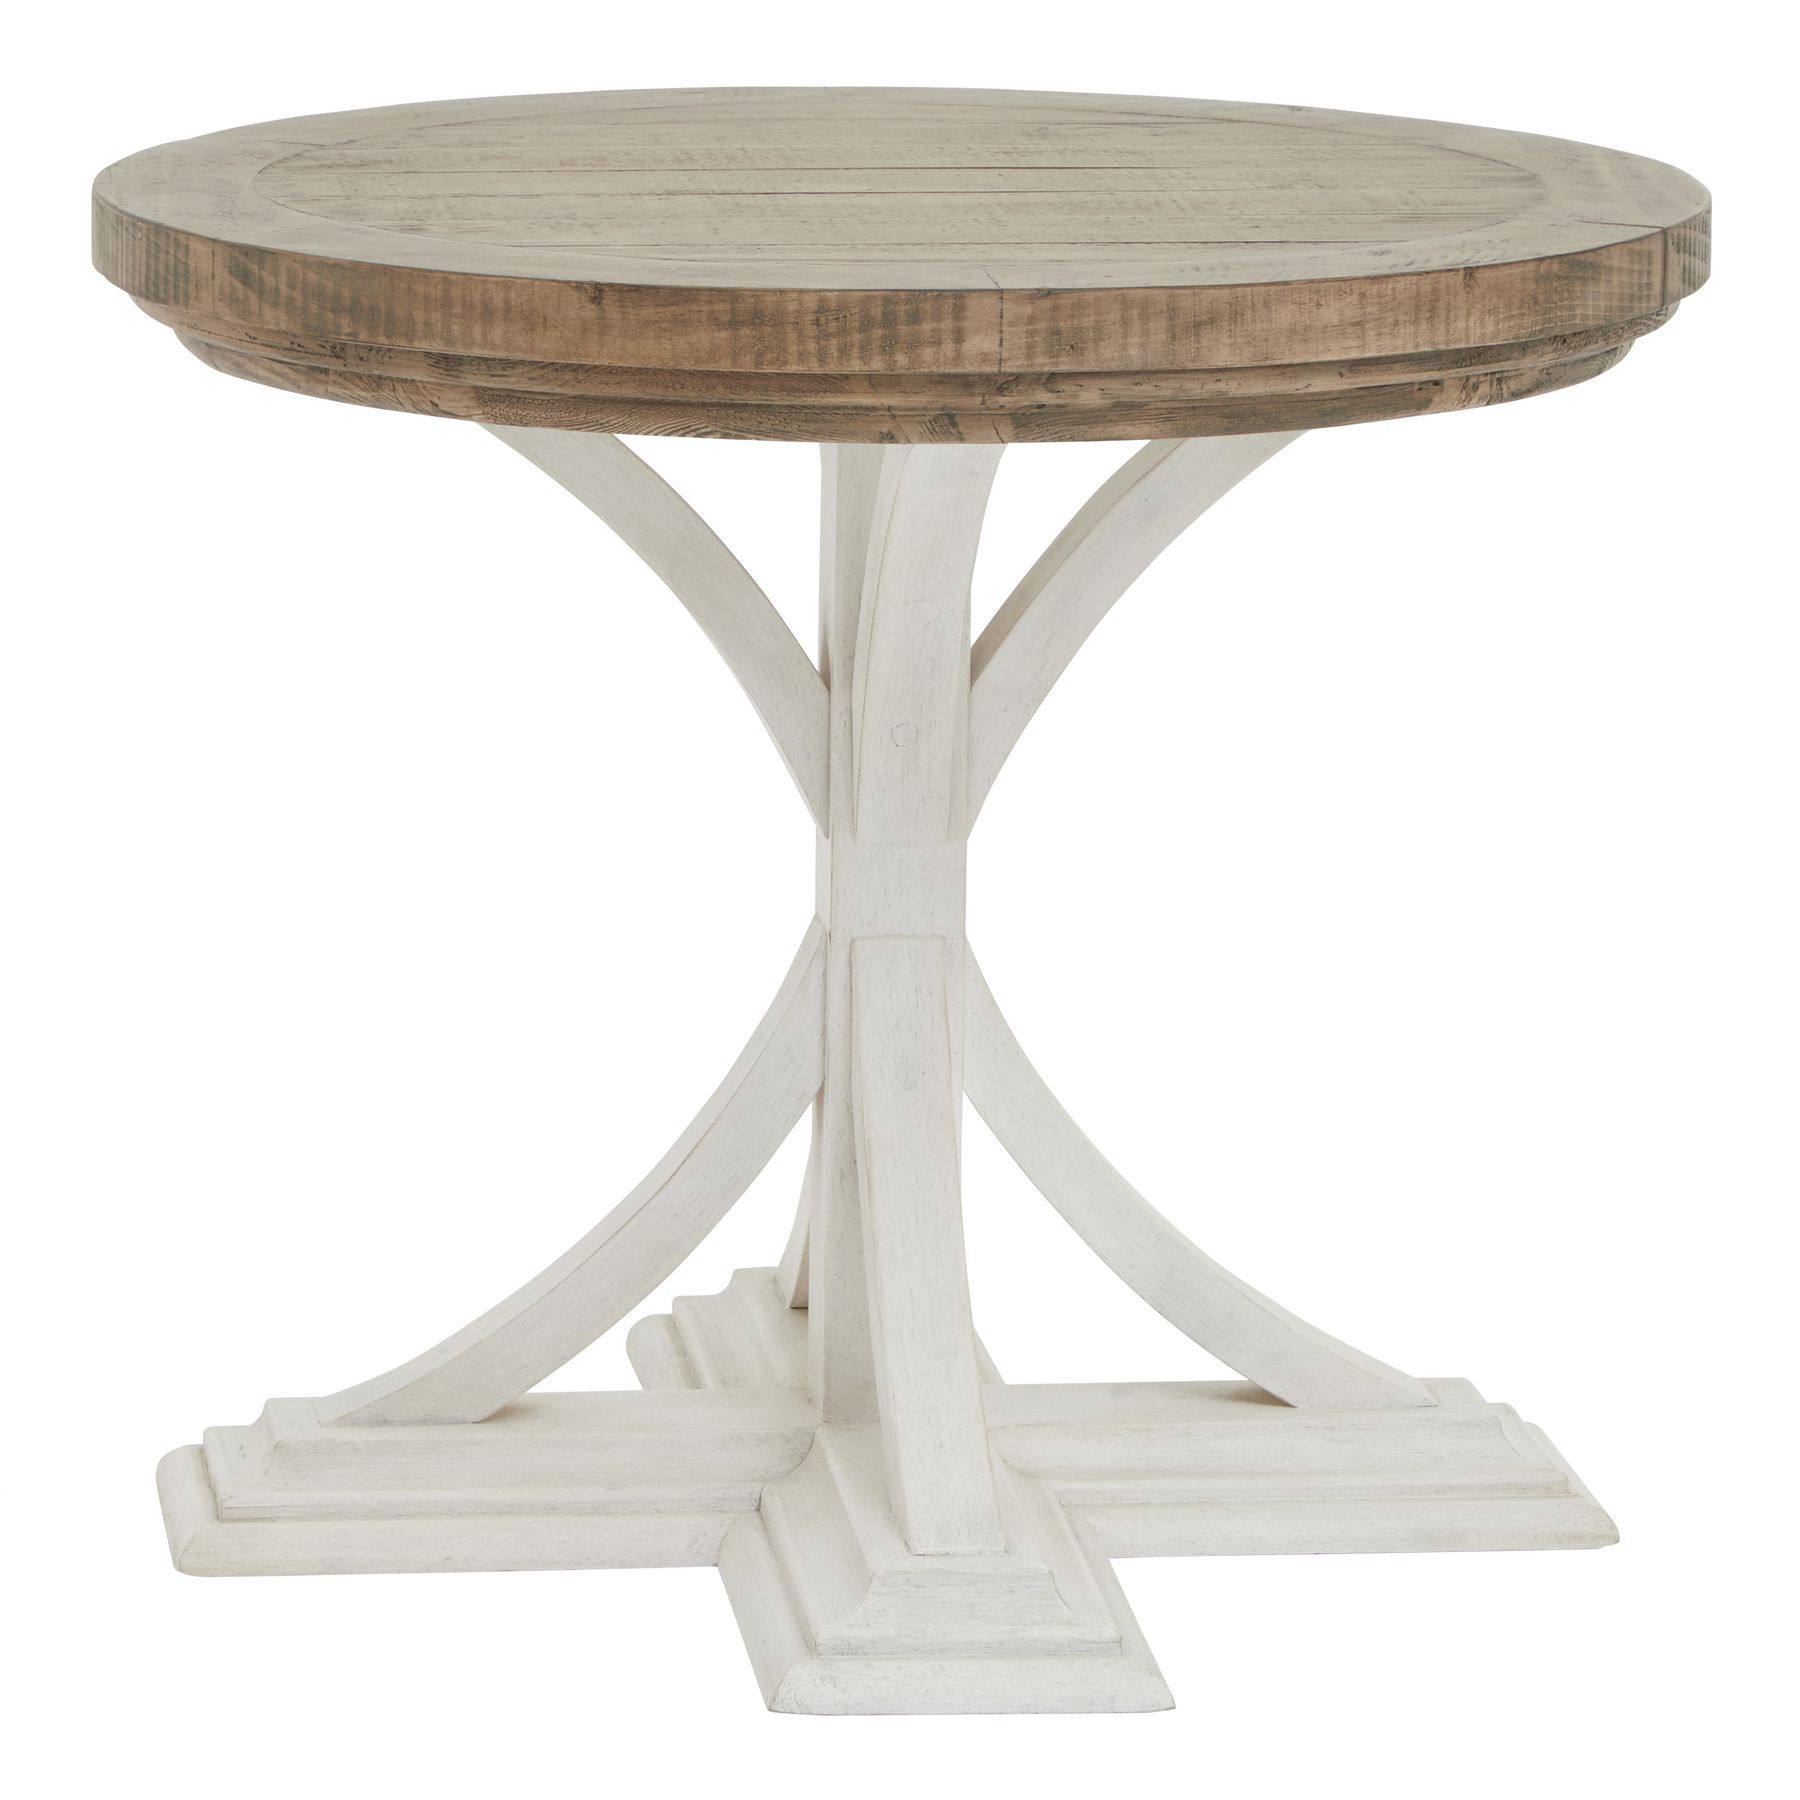 Luna Collection Round Occasional Table - Image 1